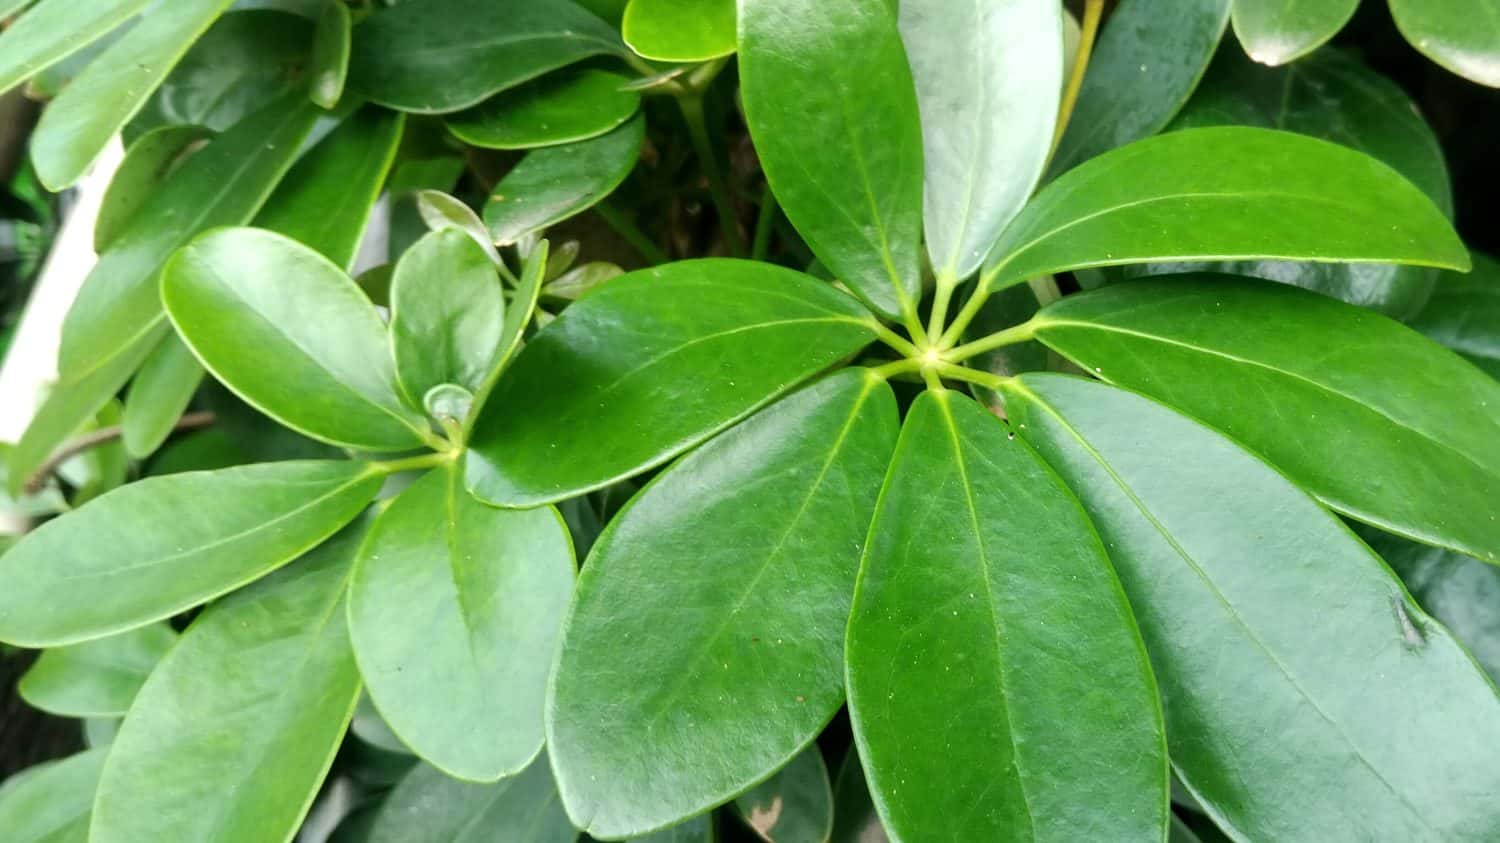 Umbrella plant (Schefflera heptaphylla) or Ivy plant. In Indonesia, it is known as the Walisongo plant.